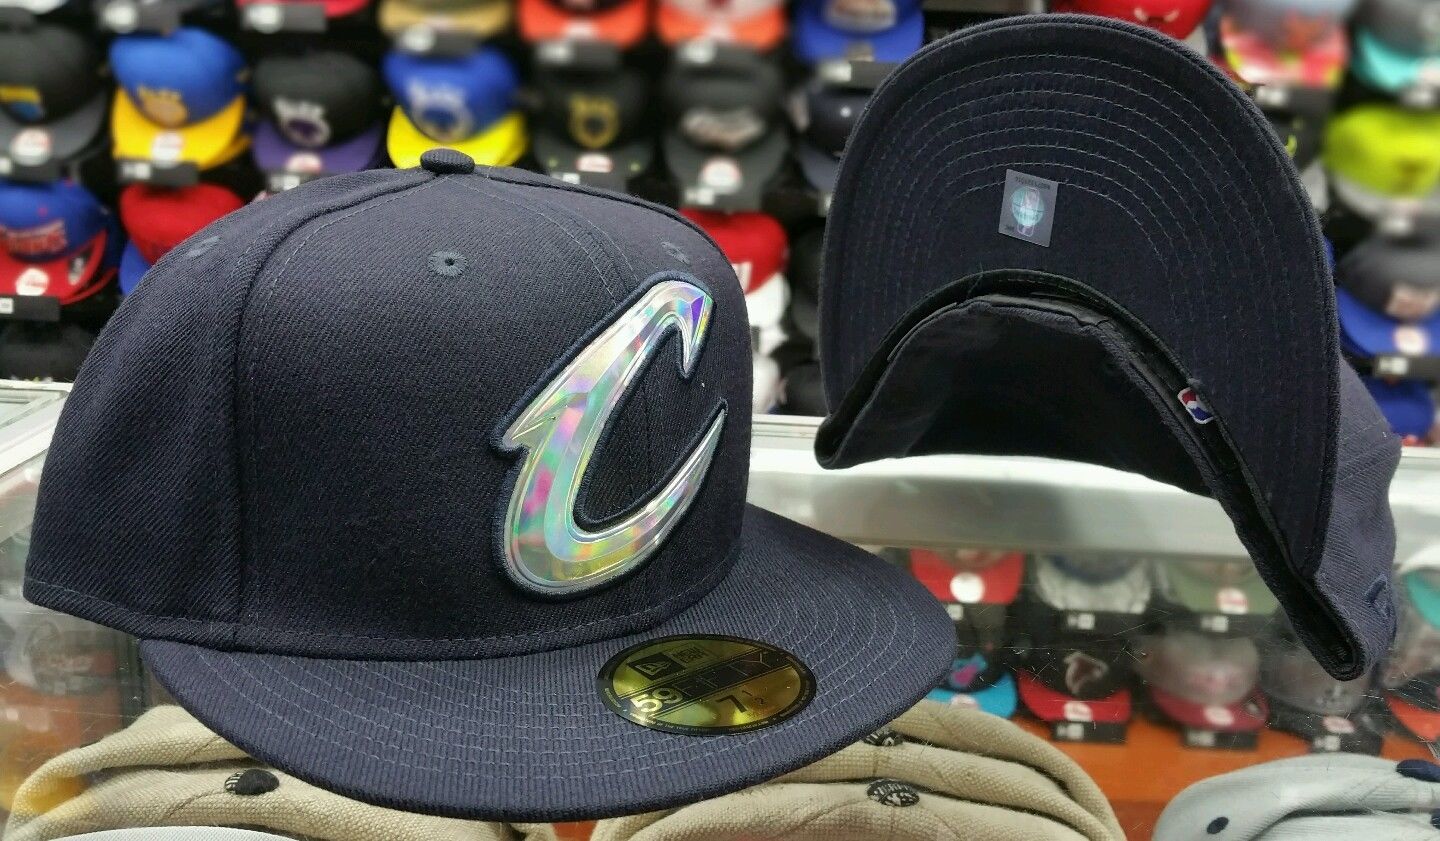 New Era NBA Iridescent Foil logo Blue Cleveland Cavaliers 59Fifty Fitted Hat Cap